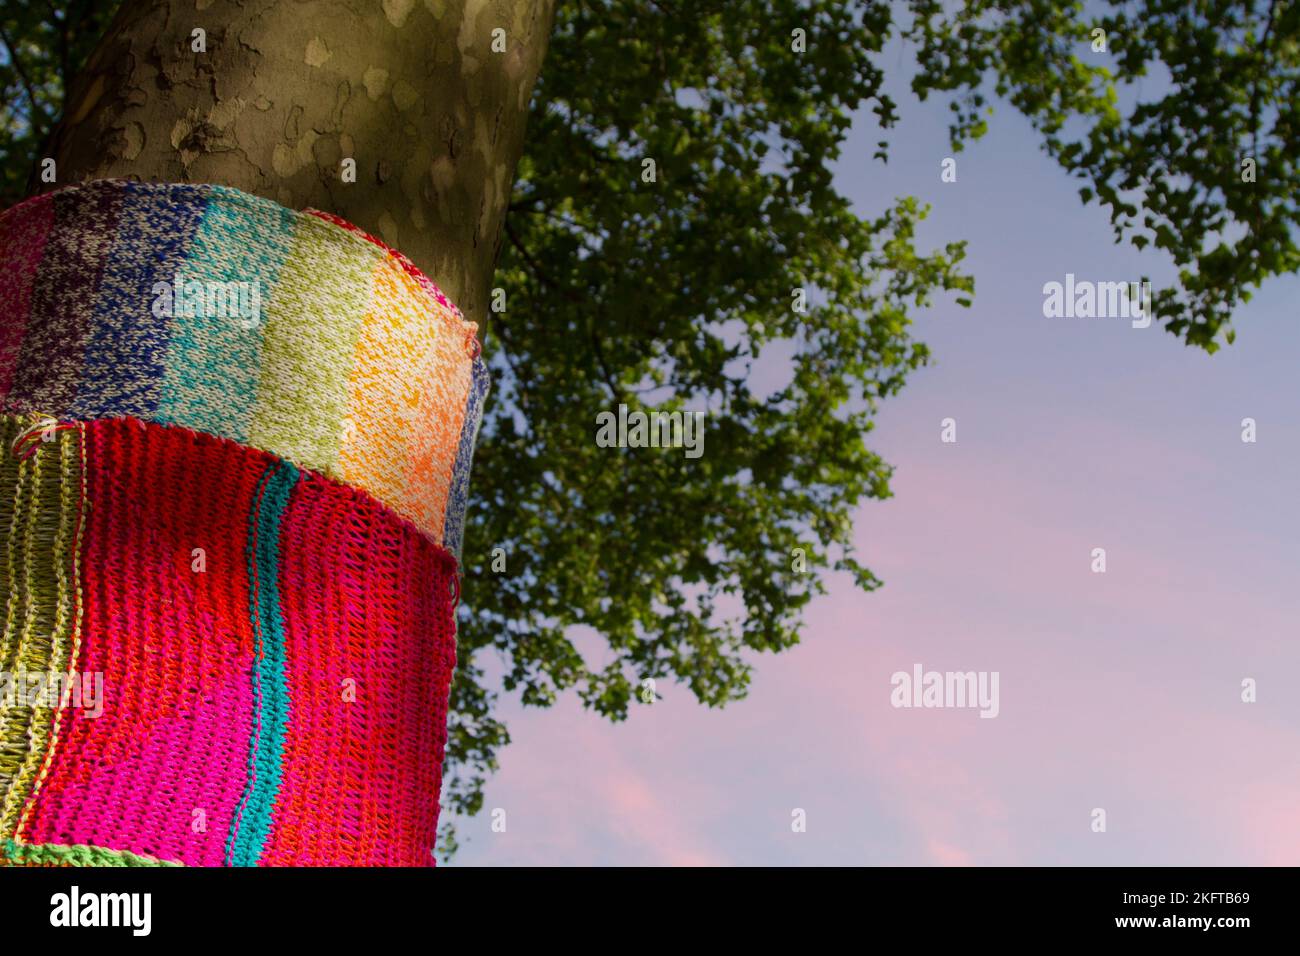 Yarn bombing (Tricot urbain in french) is  street art consisting in covering plants, trees, objects in streets or public places with decorative knitte Stock Photo